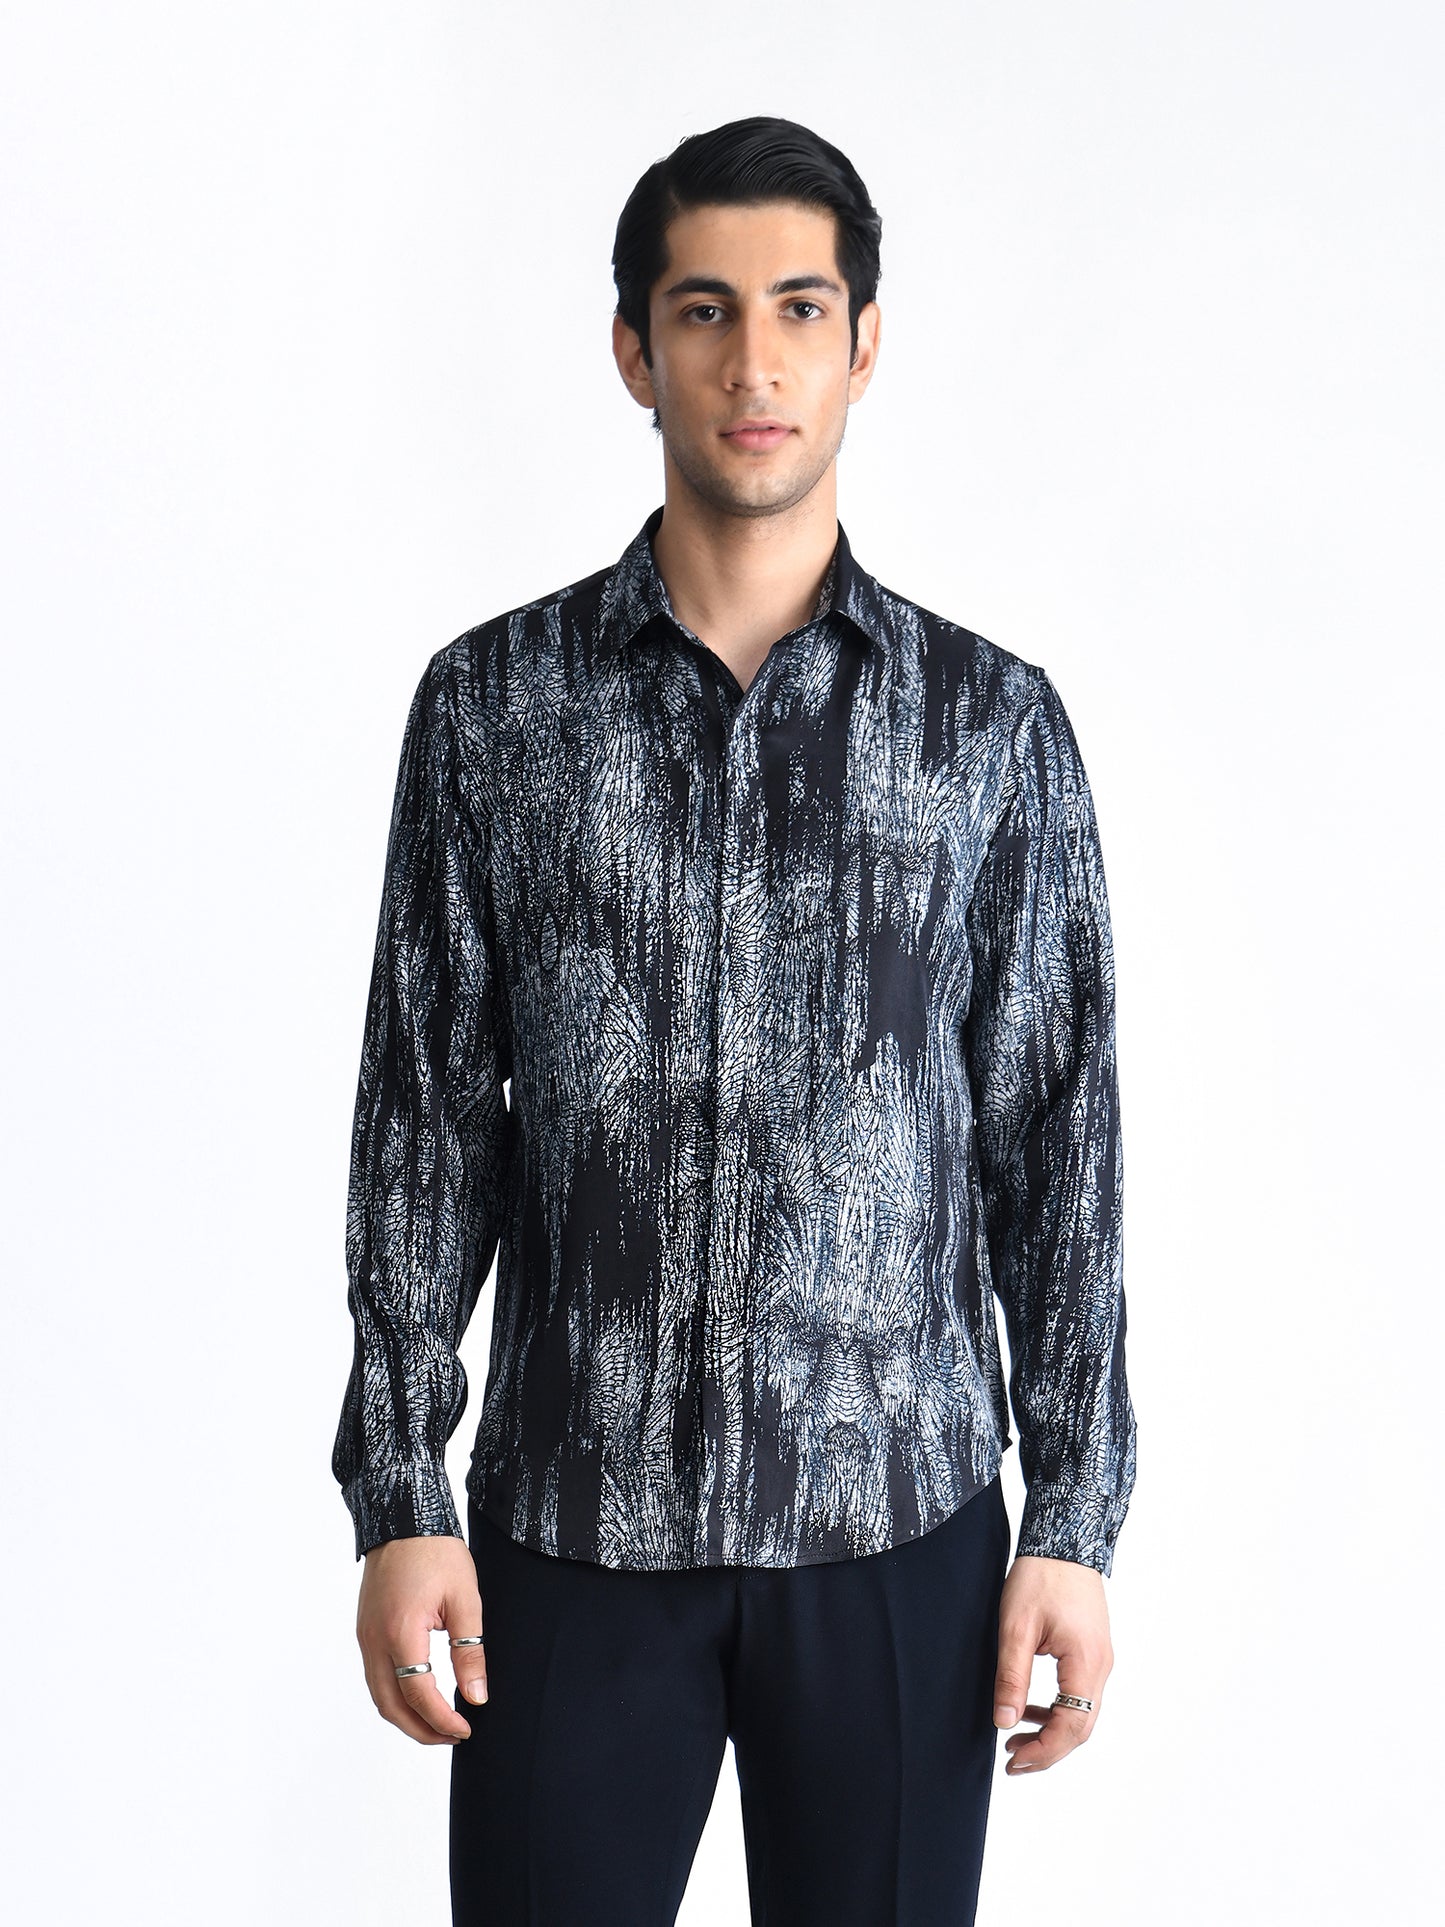 Feather Printed Full Sleeve Shirt